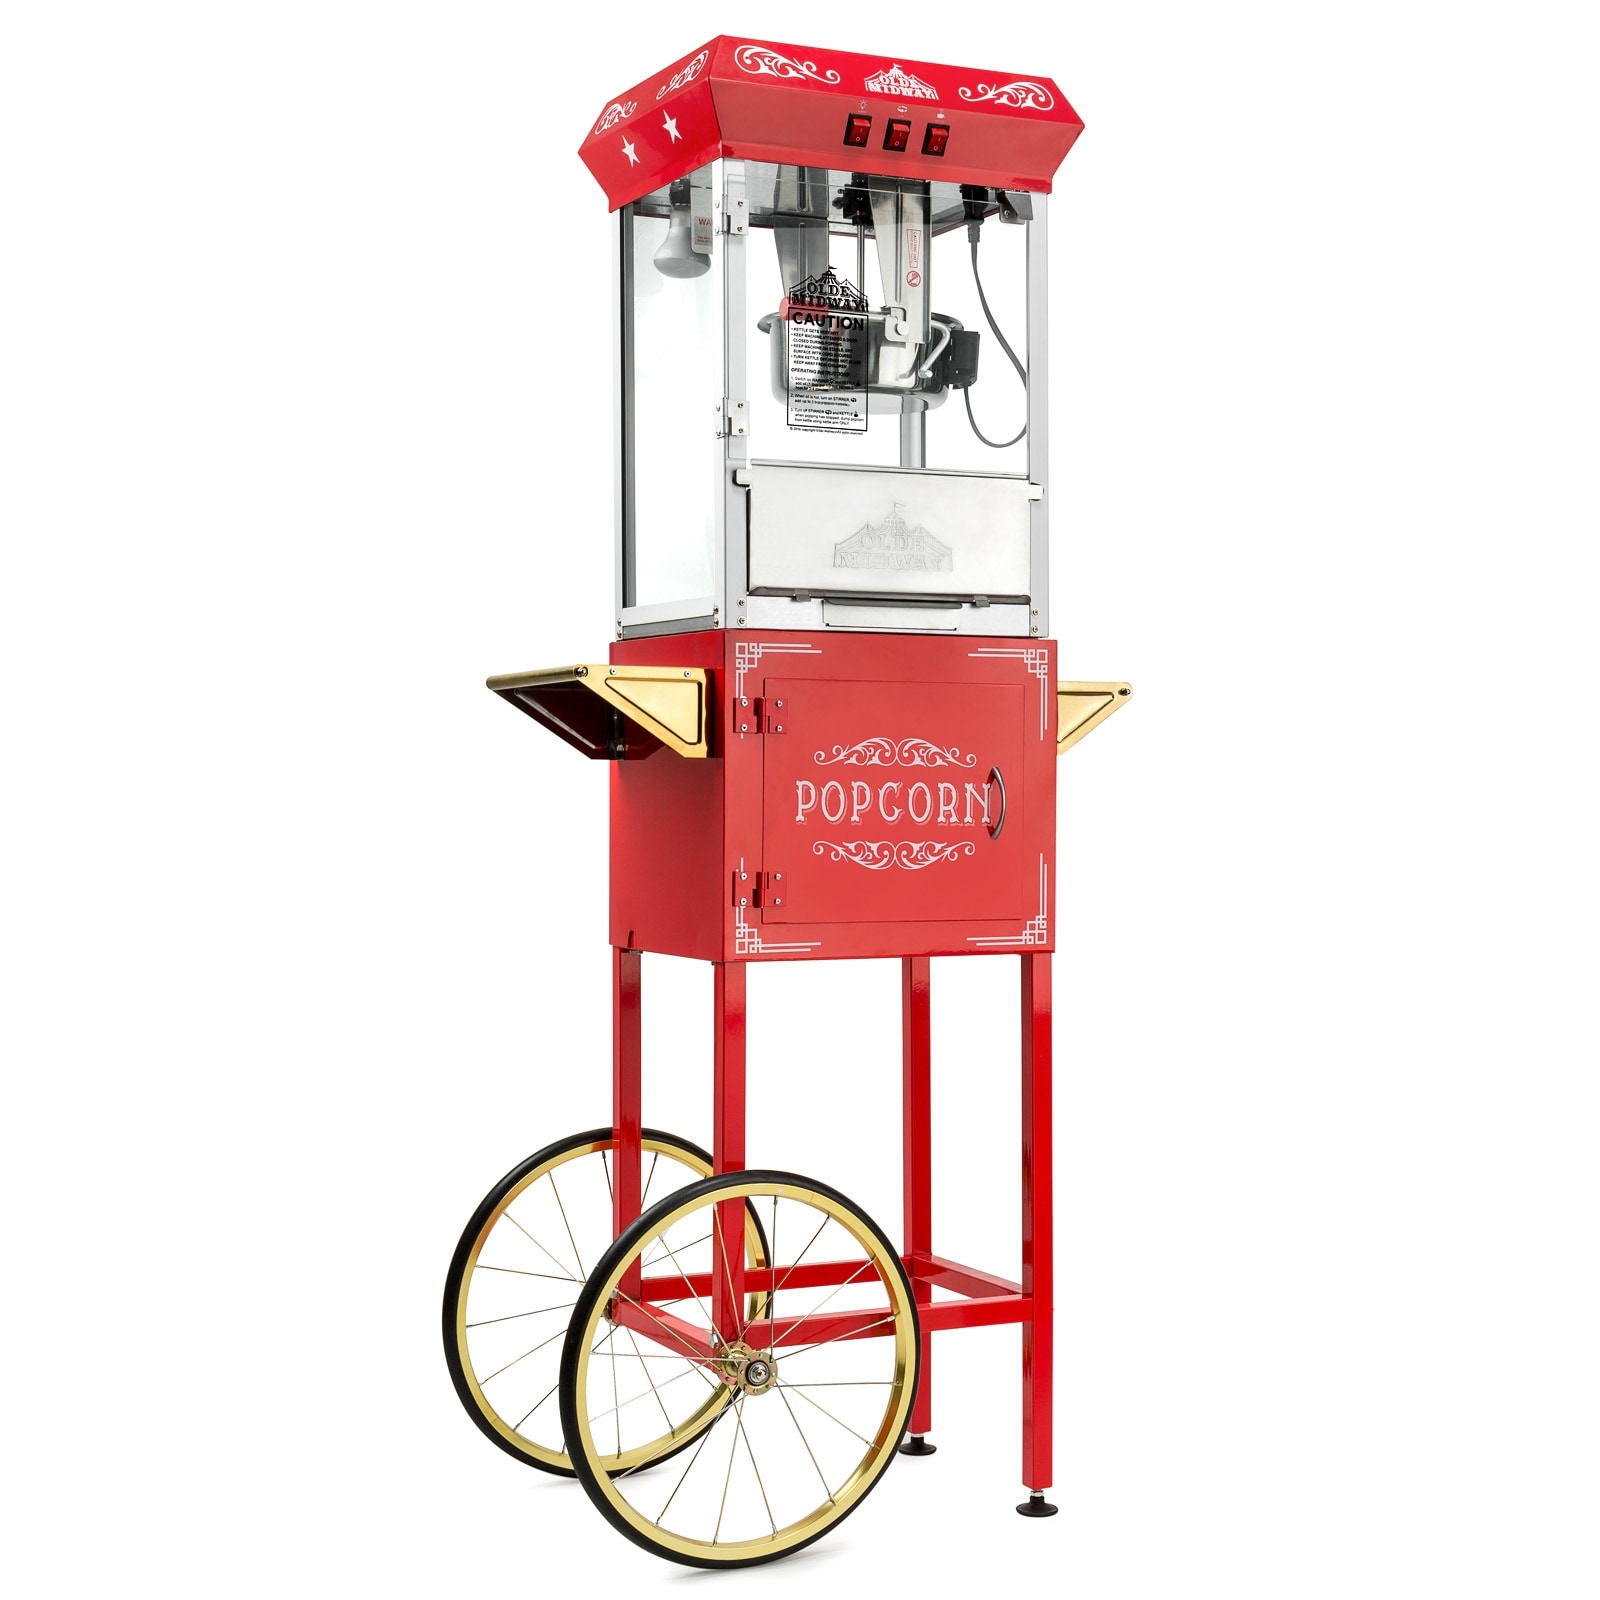 https://ak1.ostkcdn.com/images/products/is/images/direct/0240d5d54540a30da6f173f5738134ac9f018b65/Vintage-Style-Popcorn-Machine-Maker-Popper-w--Cart-and-8-Ounce-Kettle.jpg